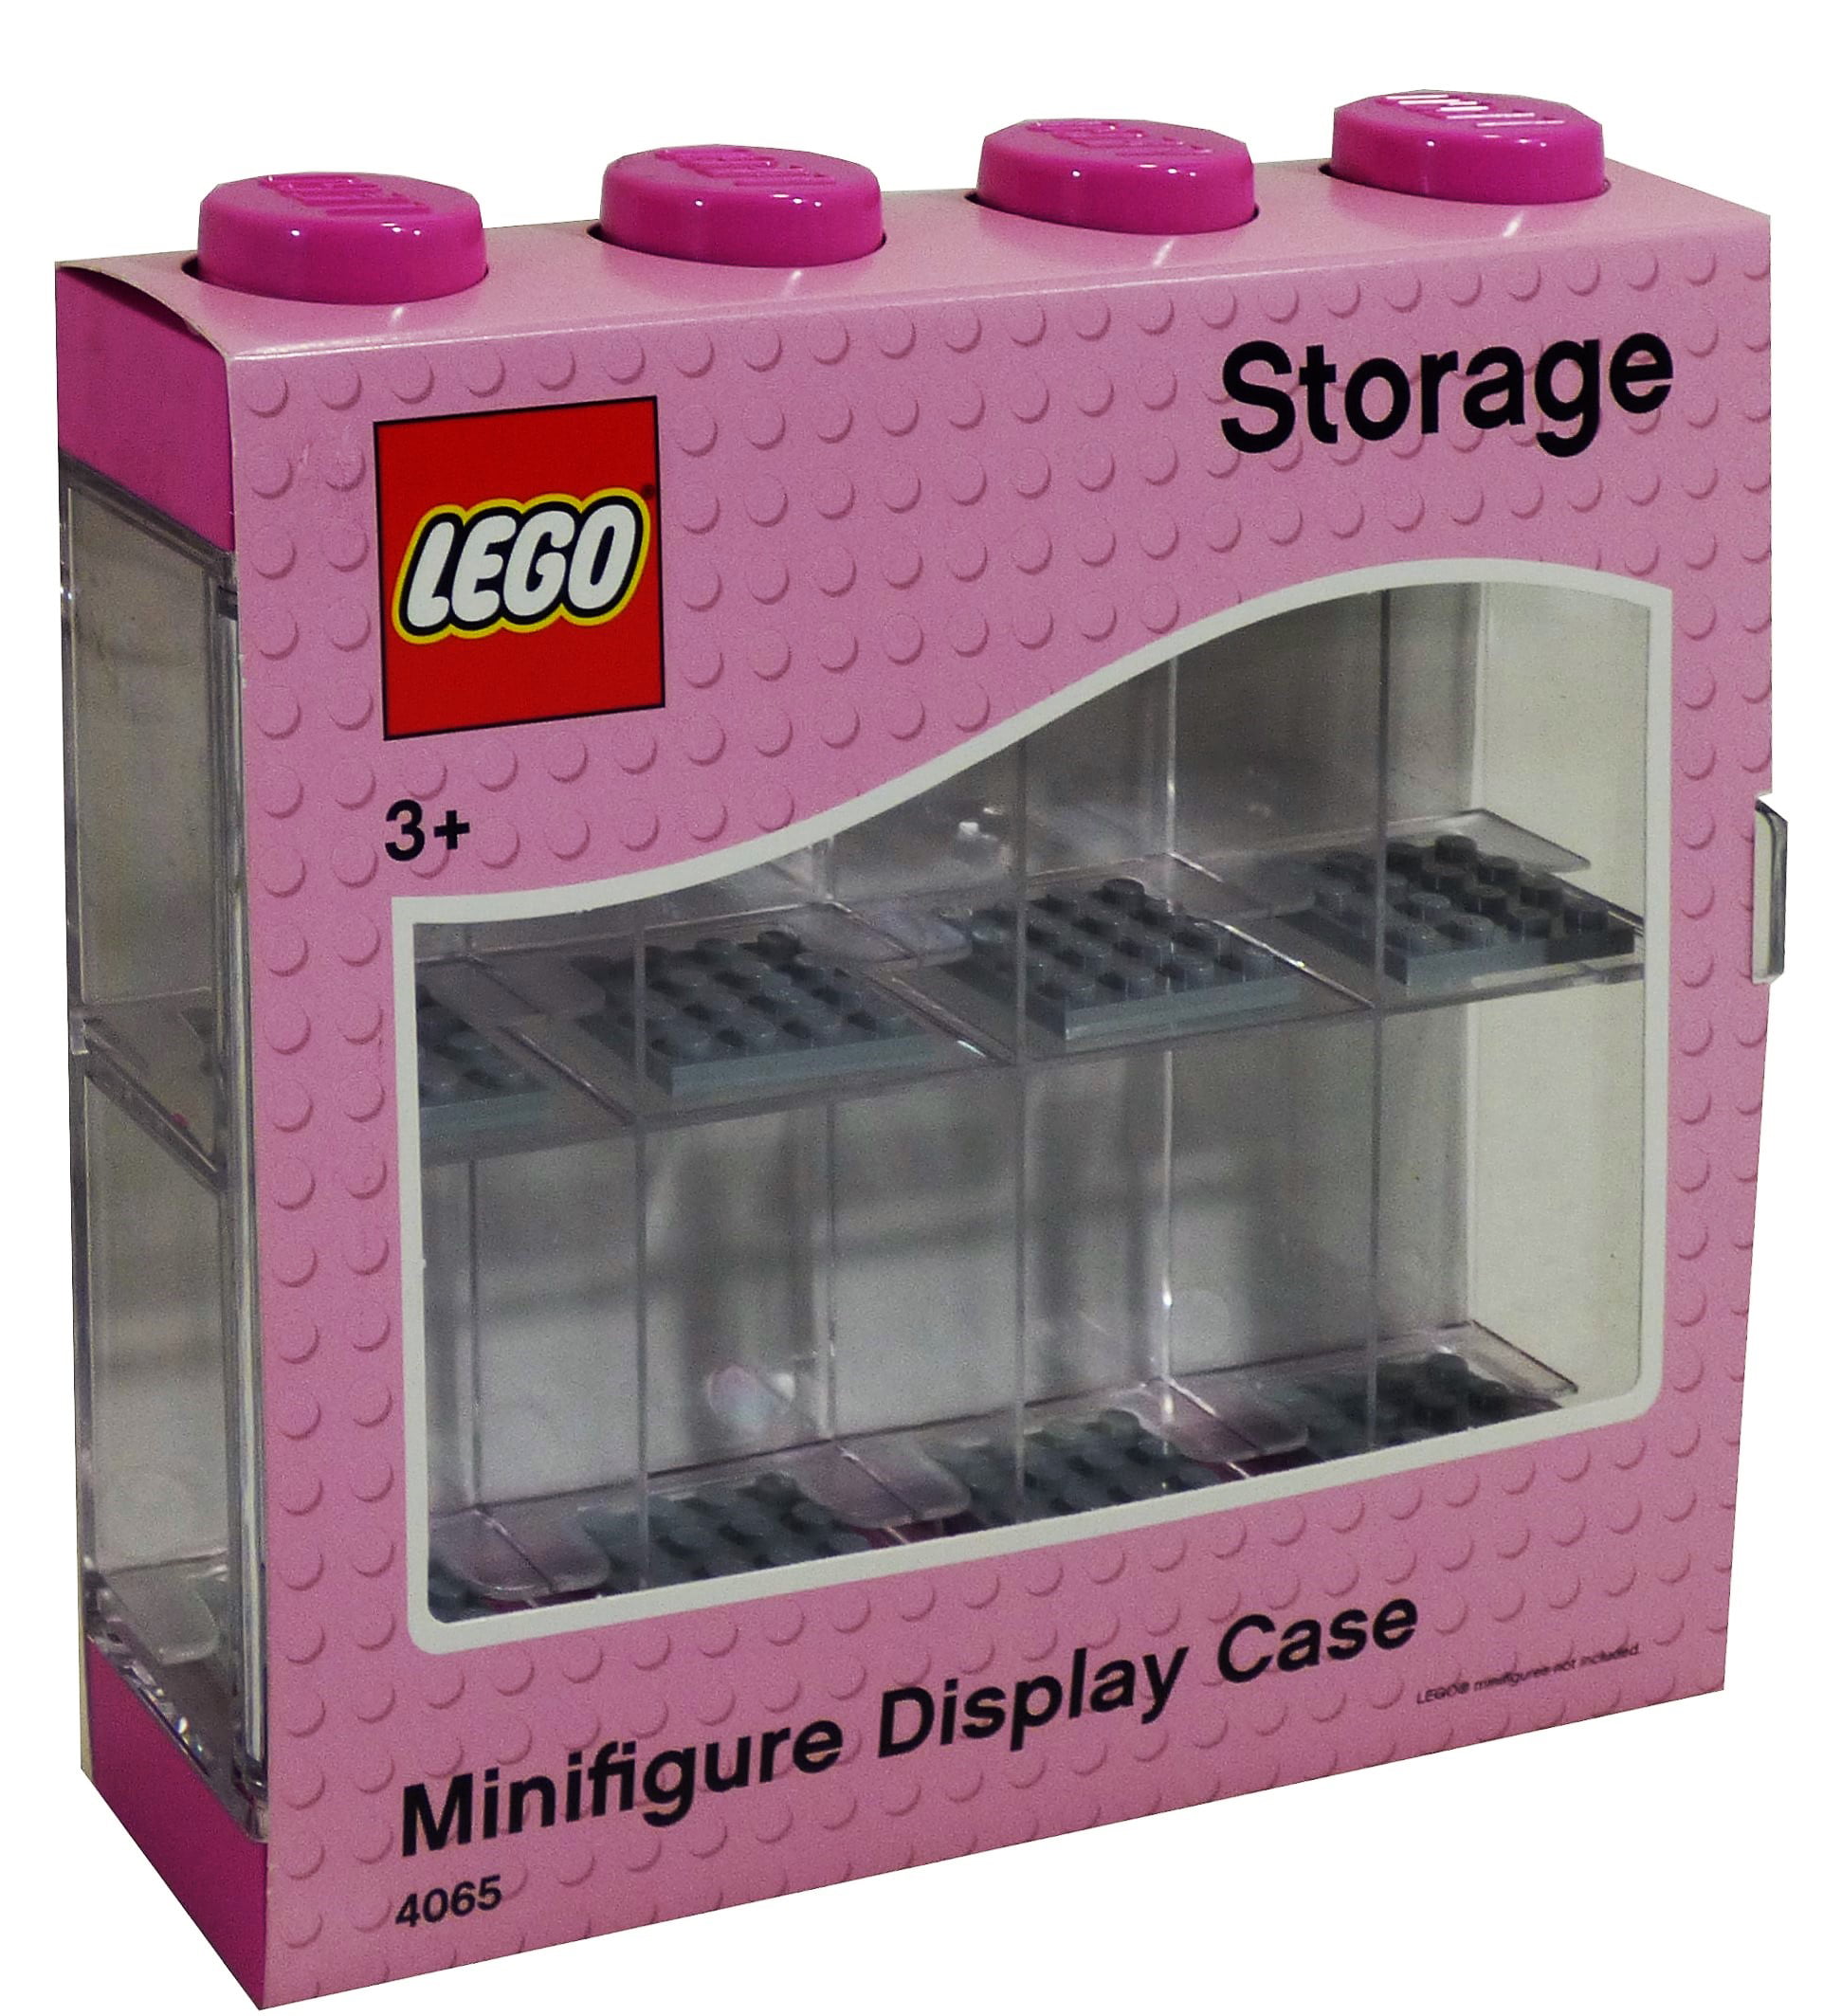 LEGO MINIFIGURE COLLECTOR'S DISPLAY BOX CASE 10PCS Transparent and expandable 